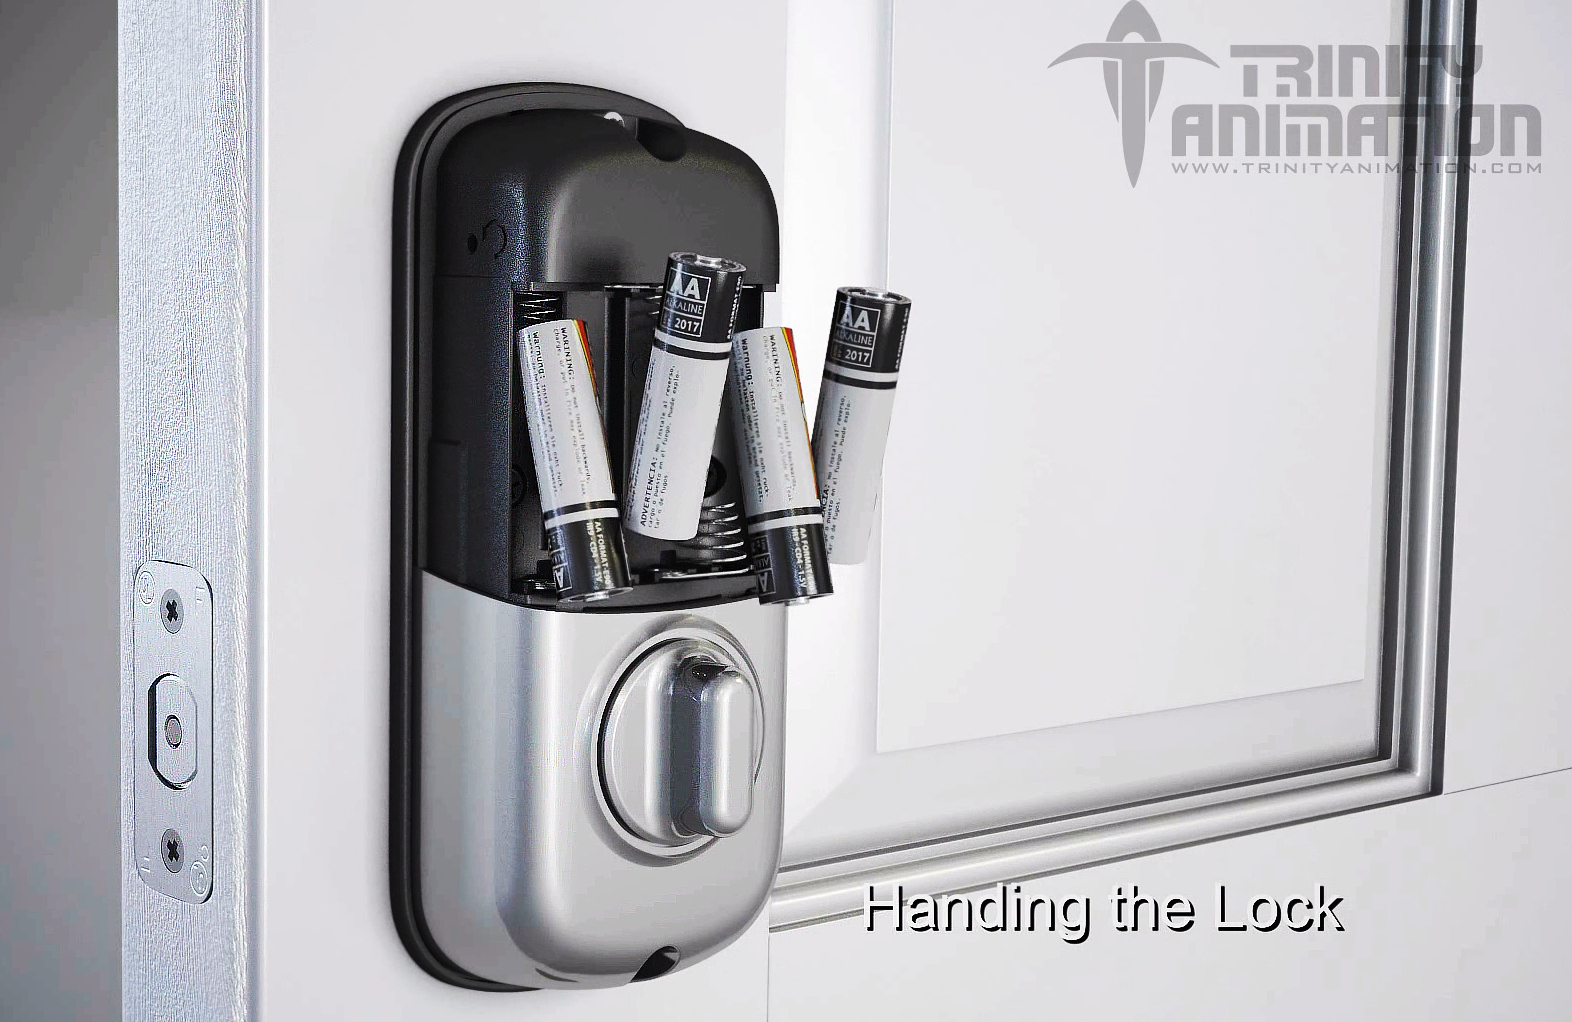 This is a 3D rendered shot from Trinity's 3D product visualization video demonstrating the installation process of the Yale Door Lock.In this shot, the 3D modeled batteries are smoothly placed into their slots on the lock, producing visuals that live footage cant while informing and engaging viewers. Each item is hyper realistically rendered.